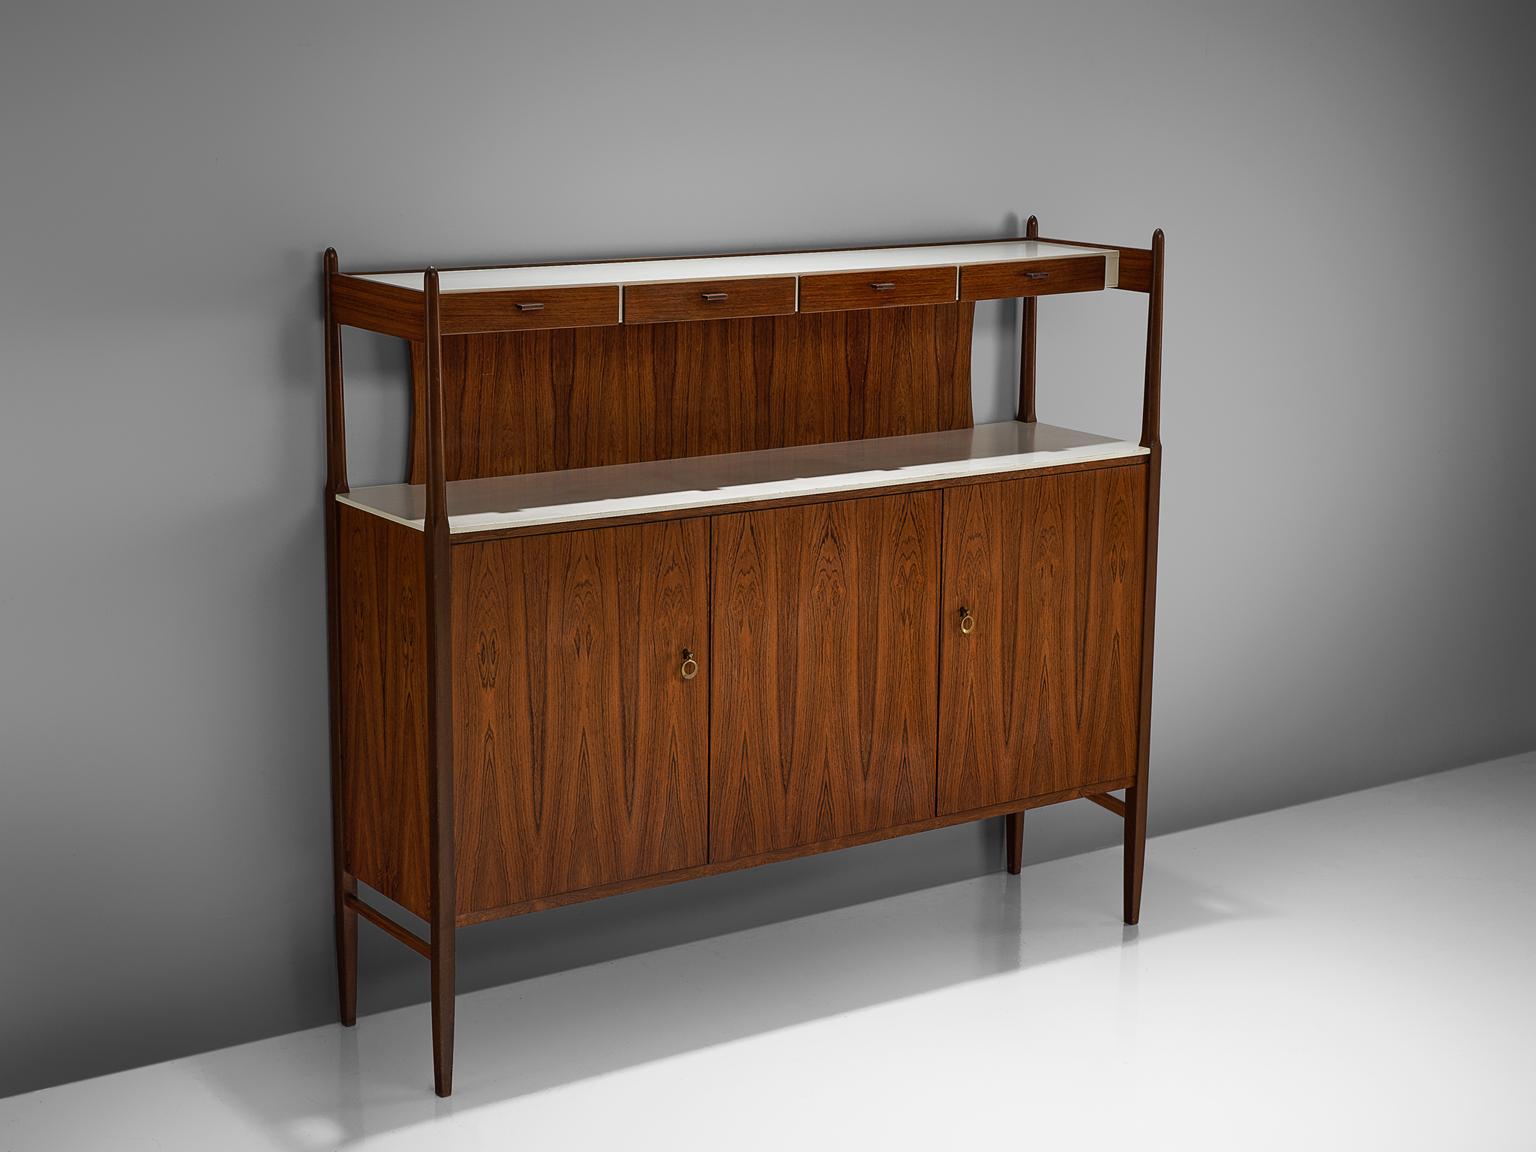 Highboard, rosewood, brass, Denmark, circa 1950.

The bottom unit of this console consists out of three doors with shelving on the inside, with a white lacquered top. The top unit has four small drawers, perfect for cutlery or other small items,